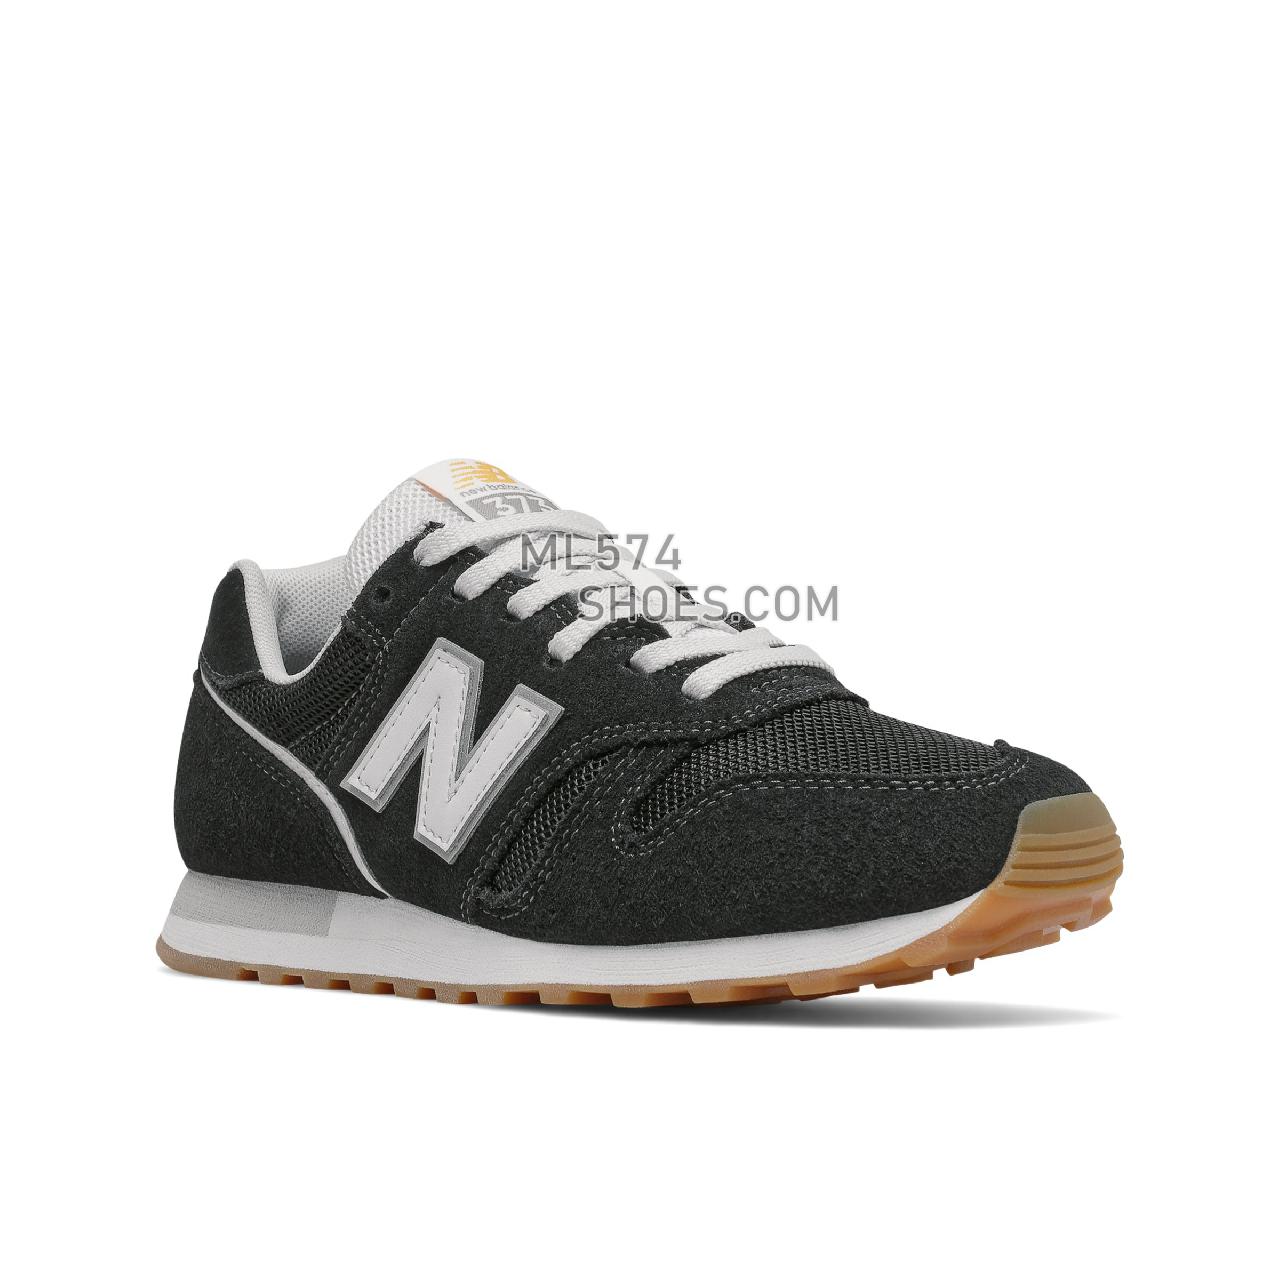 New Balance 373V2 - Women's Classic Sneakers - Marblehead with White - WL373HN2